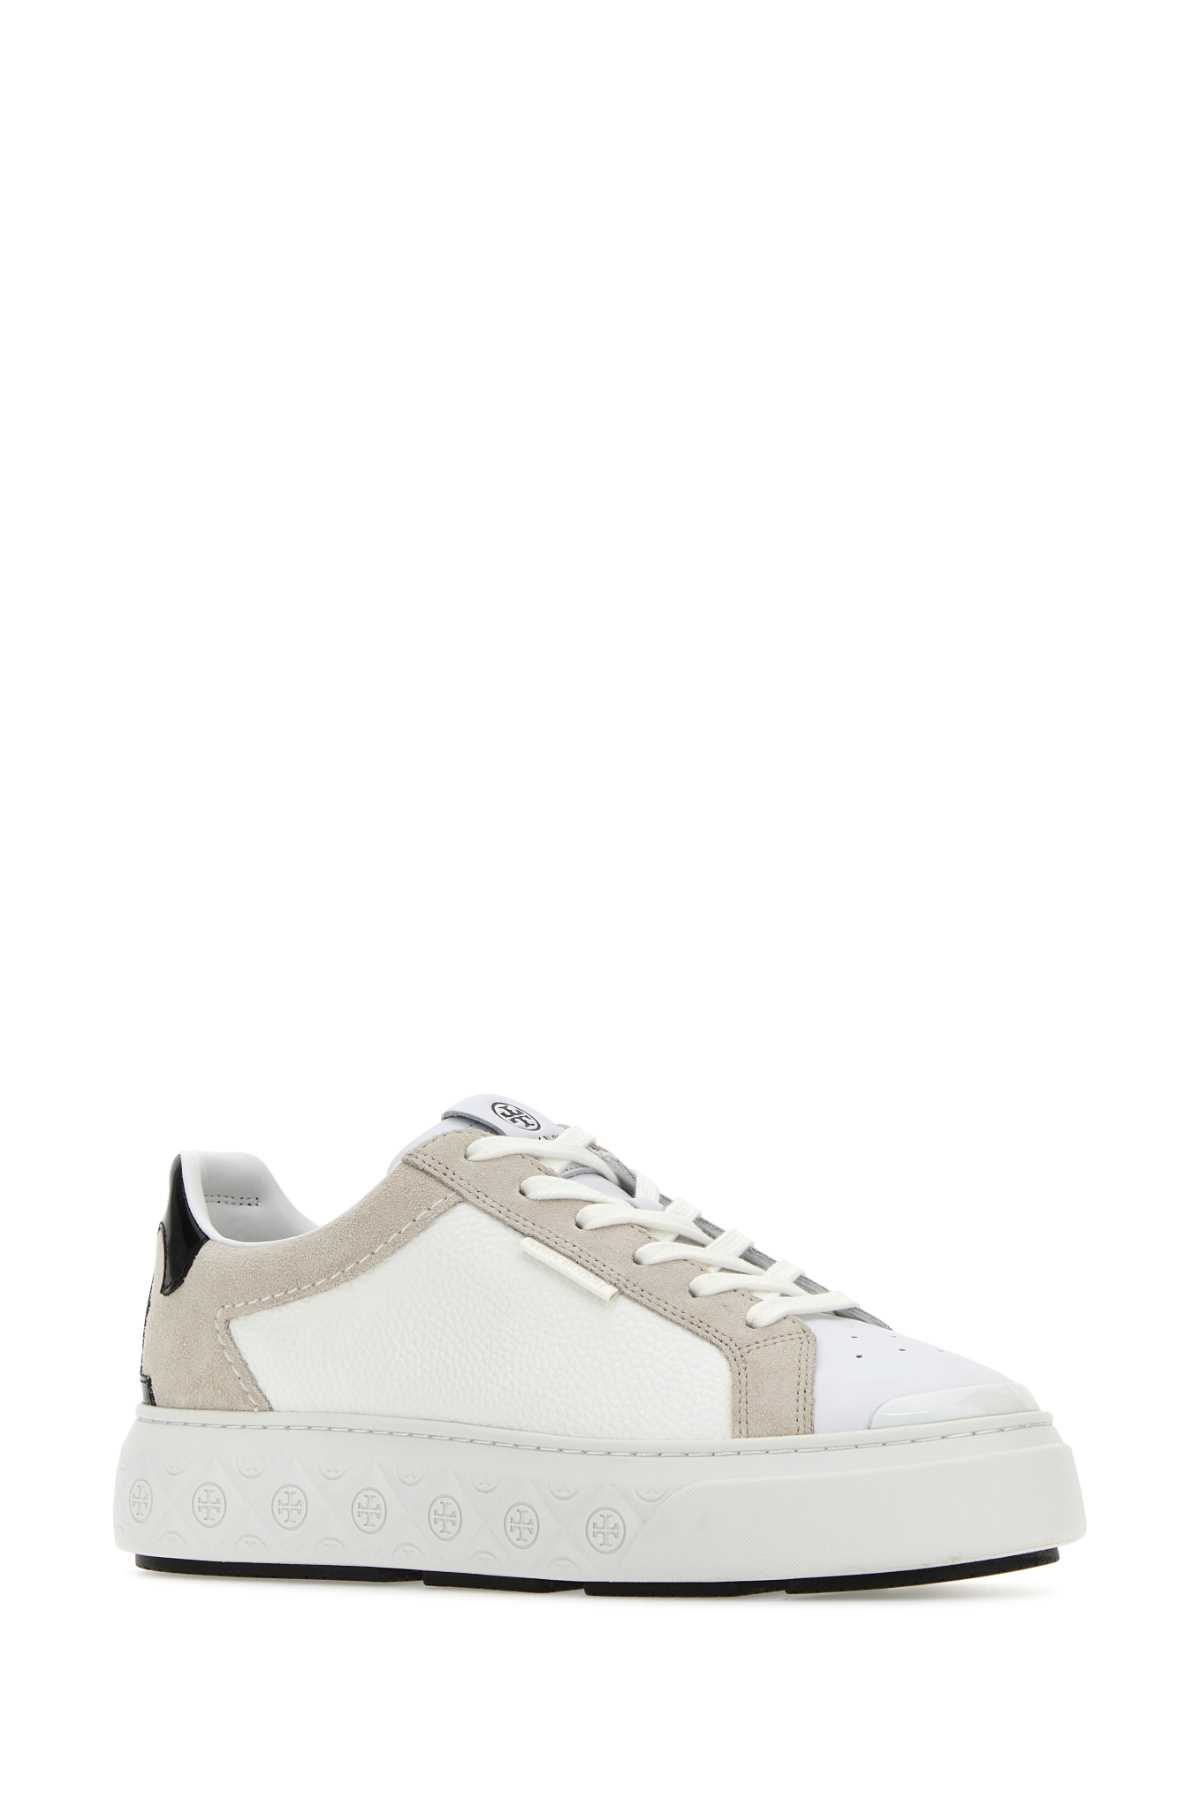 Tory Burch Two-tone Leather And Suede Ladybug Sneakers In Titaniumwhiteblack